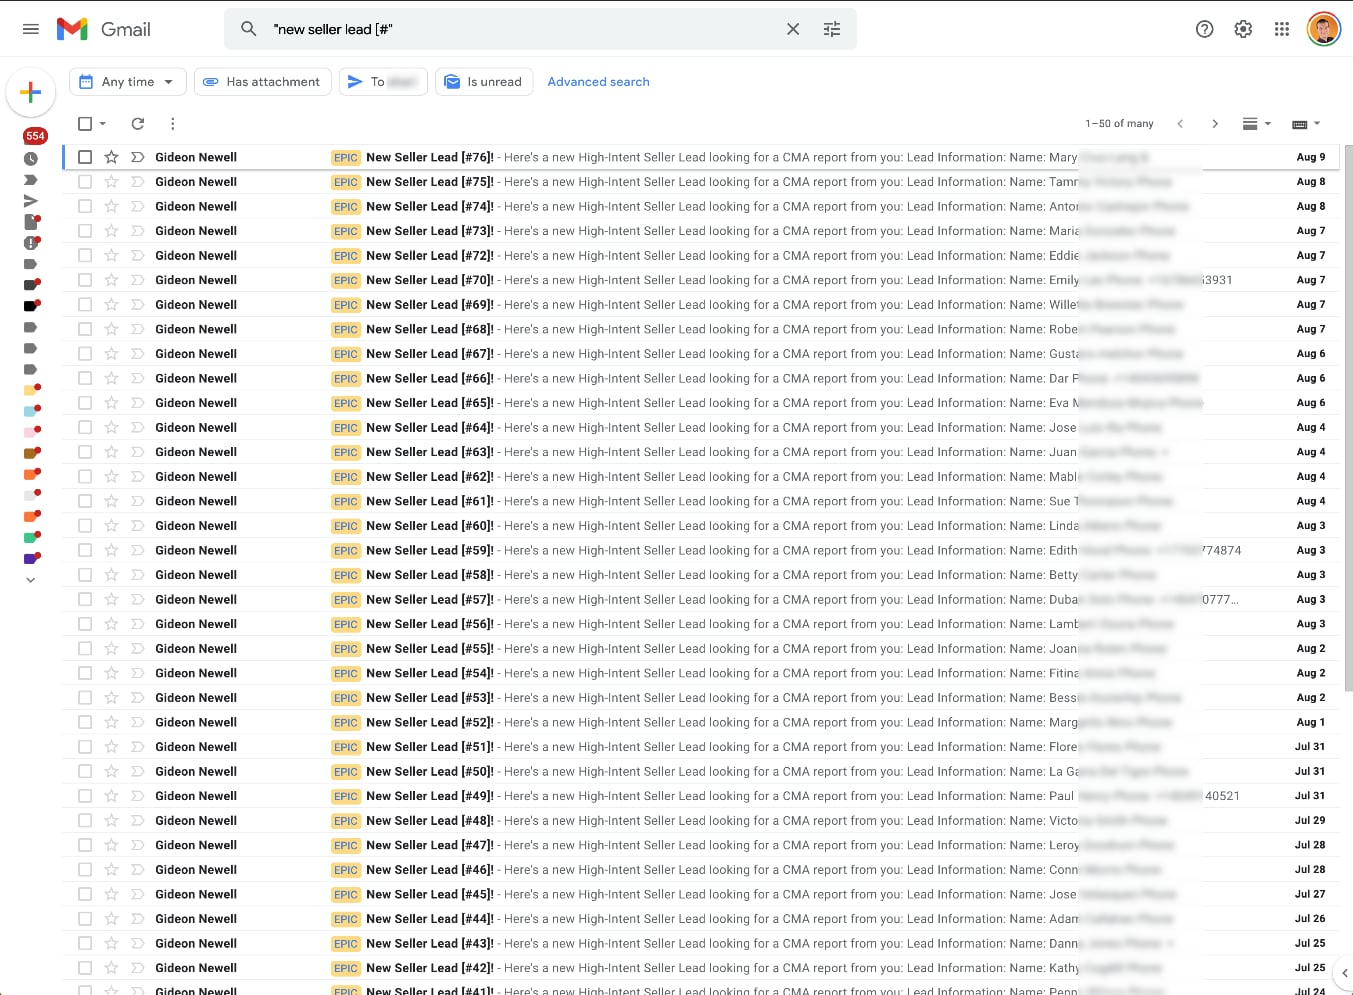 Your inbox could look like this, too: